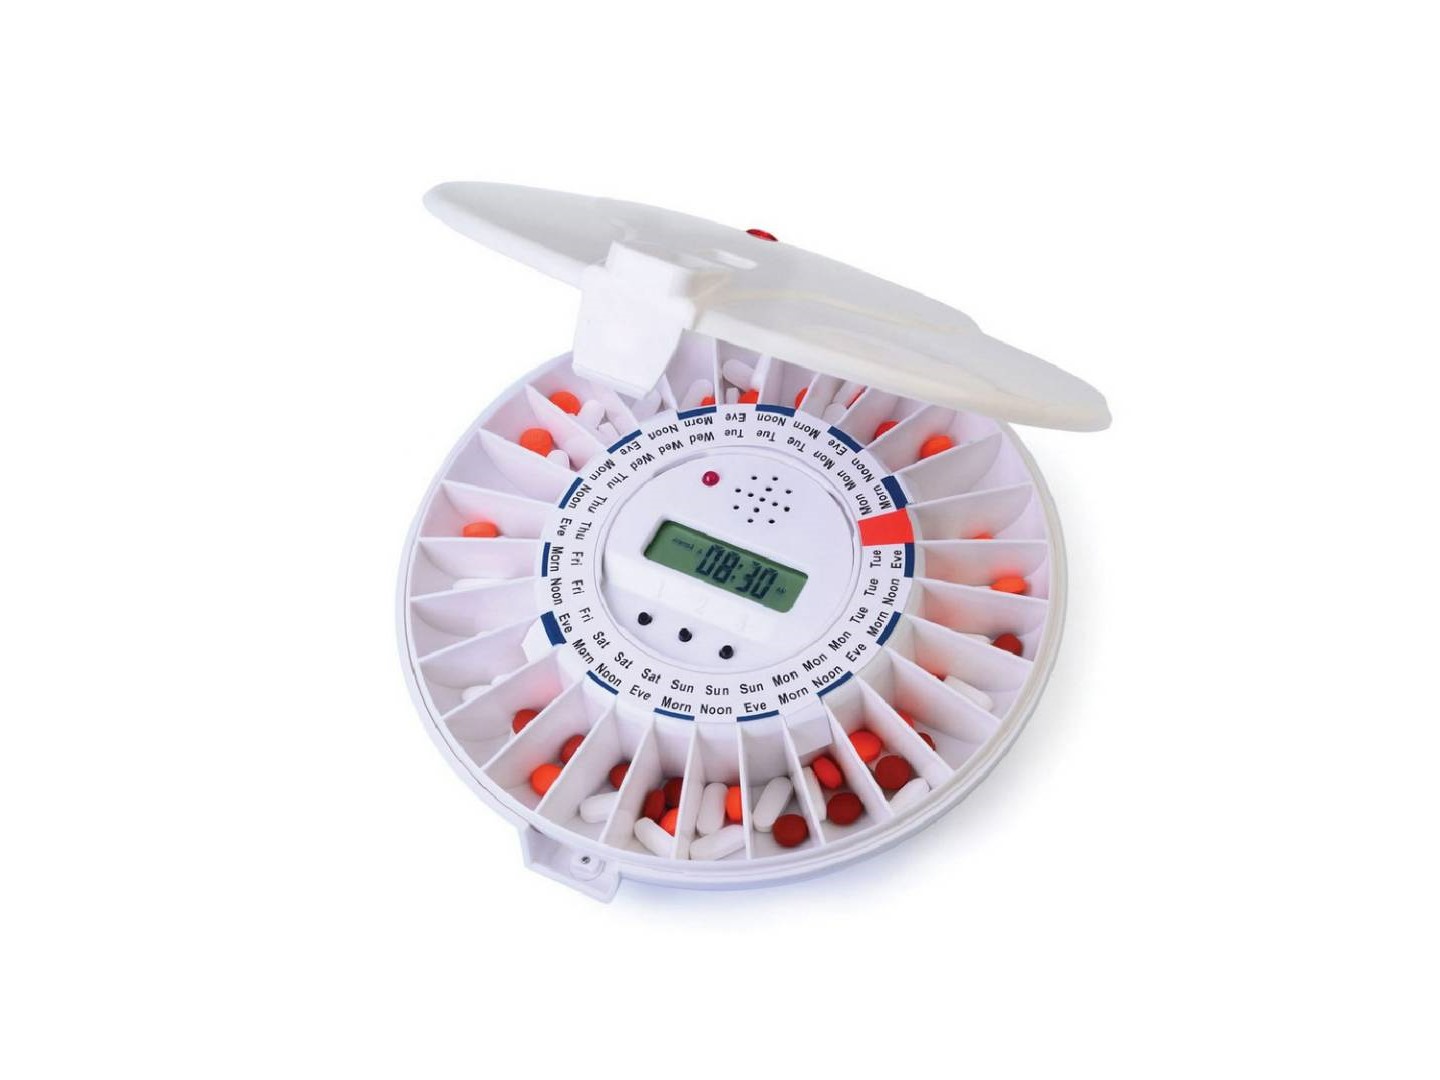 Automatic Pill Dispenser in white with 28 medication compartments.